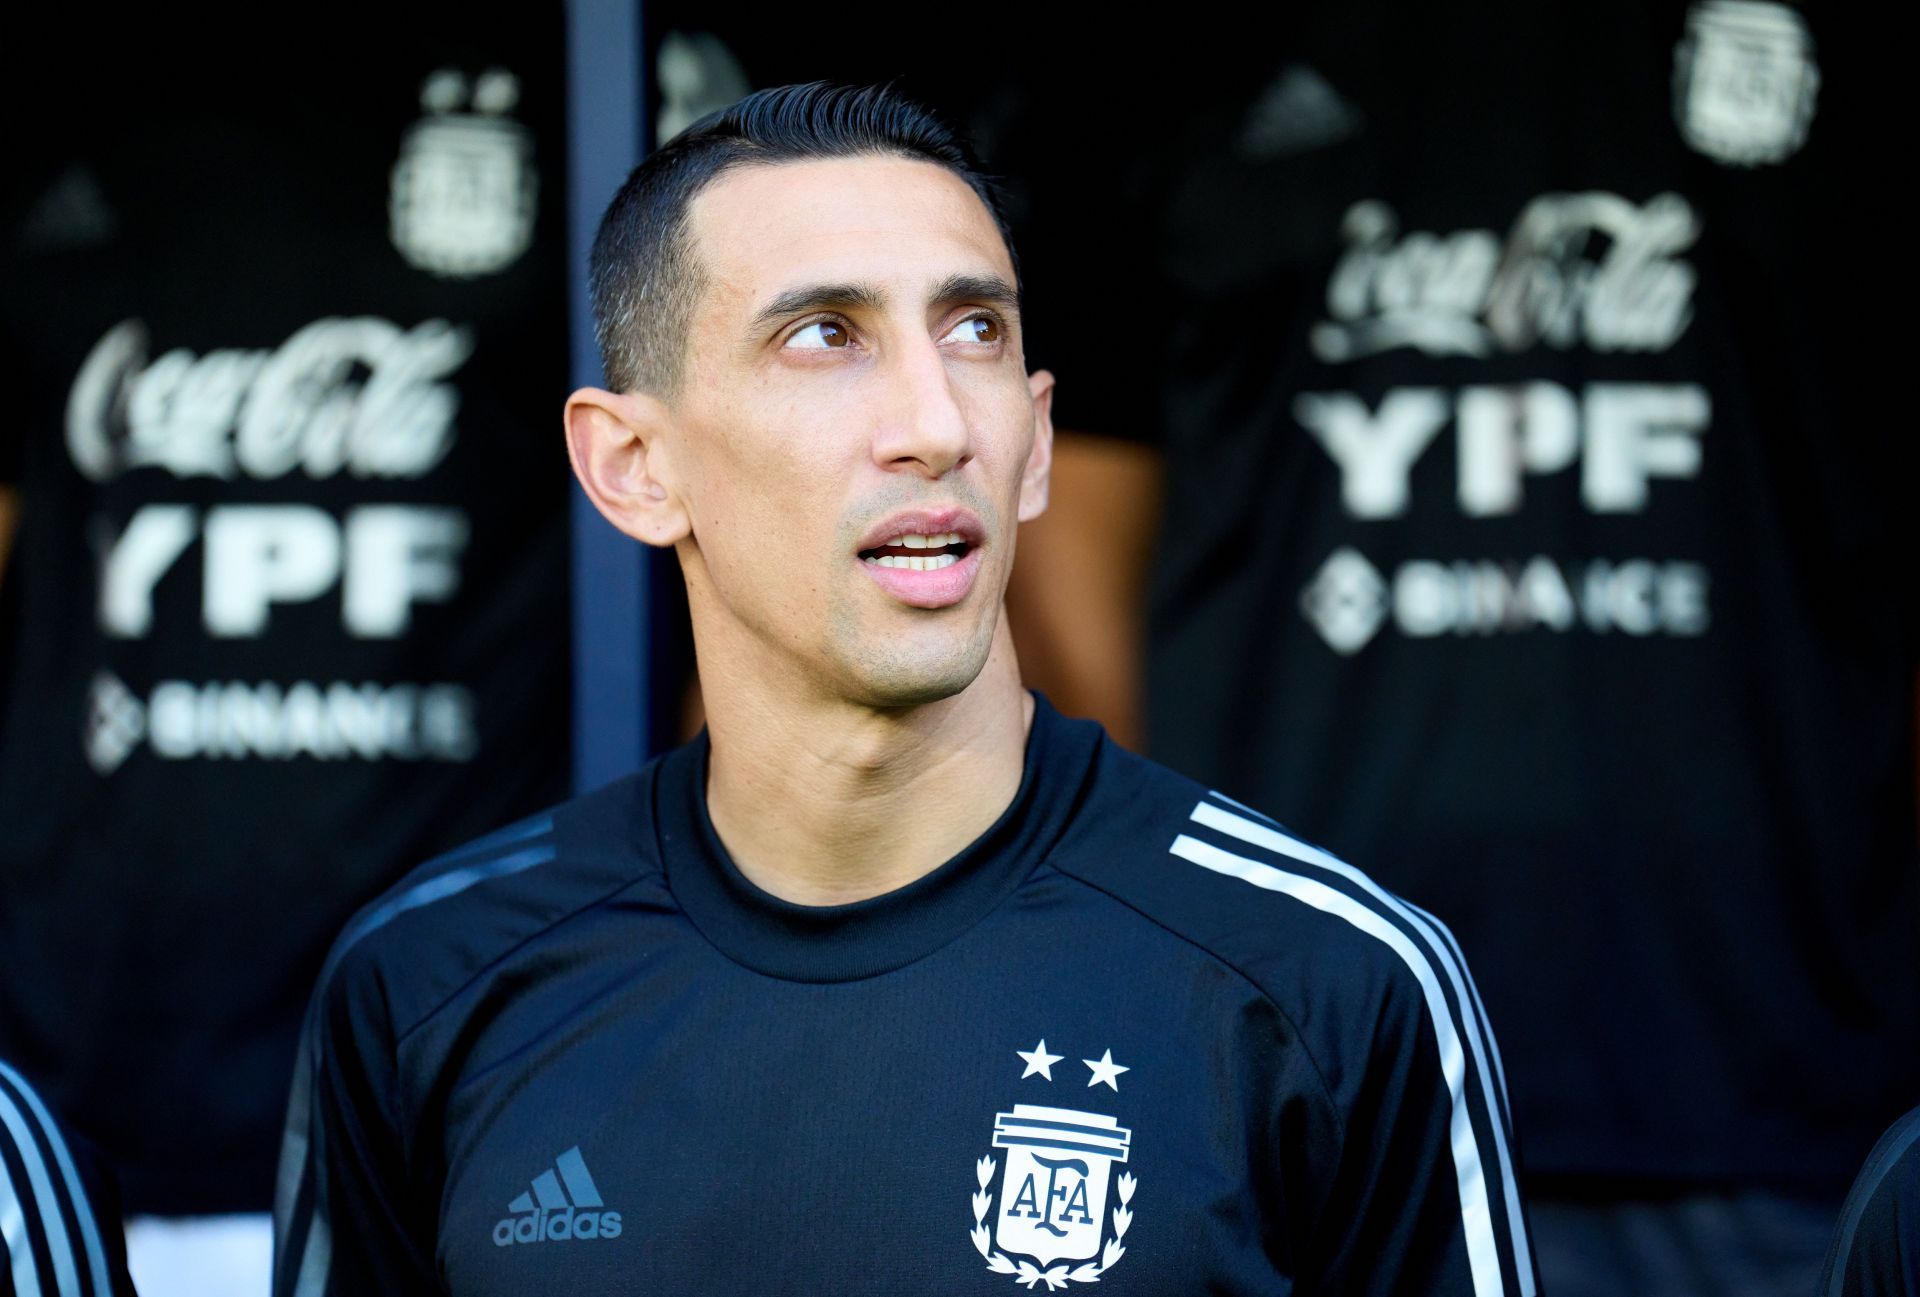 Angel Di Maria could be on his way to Turin.